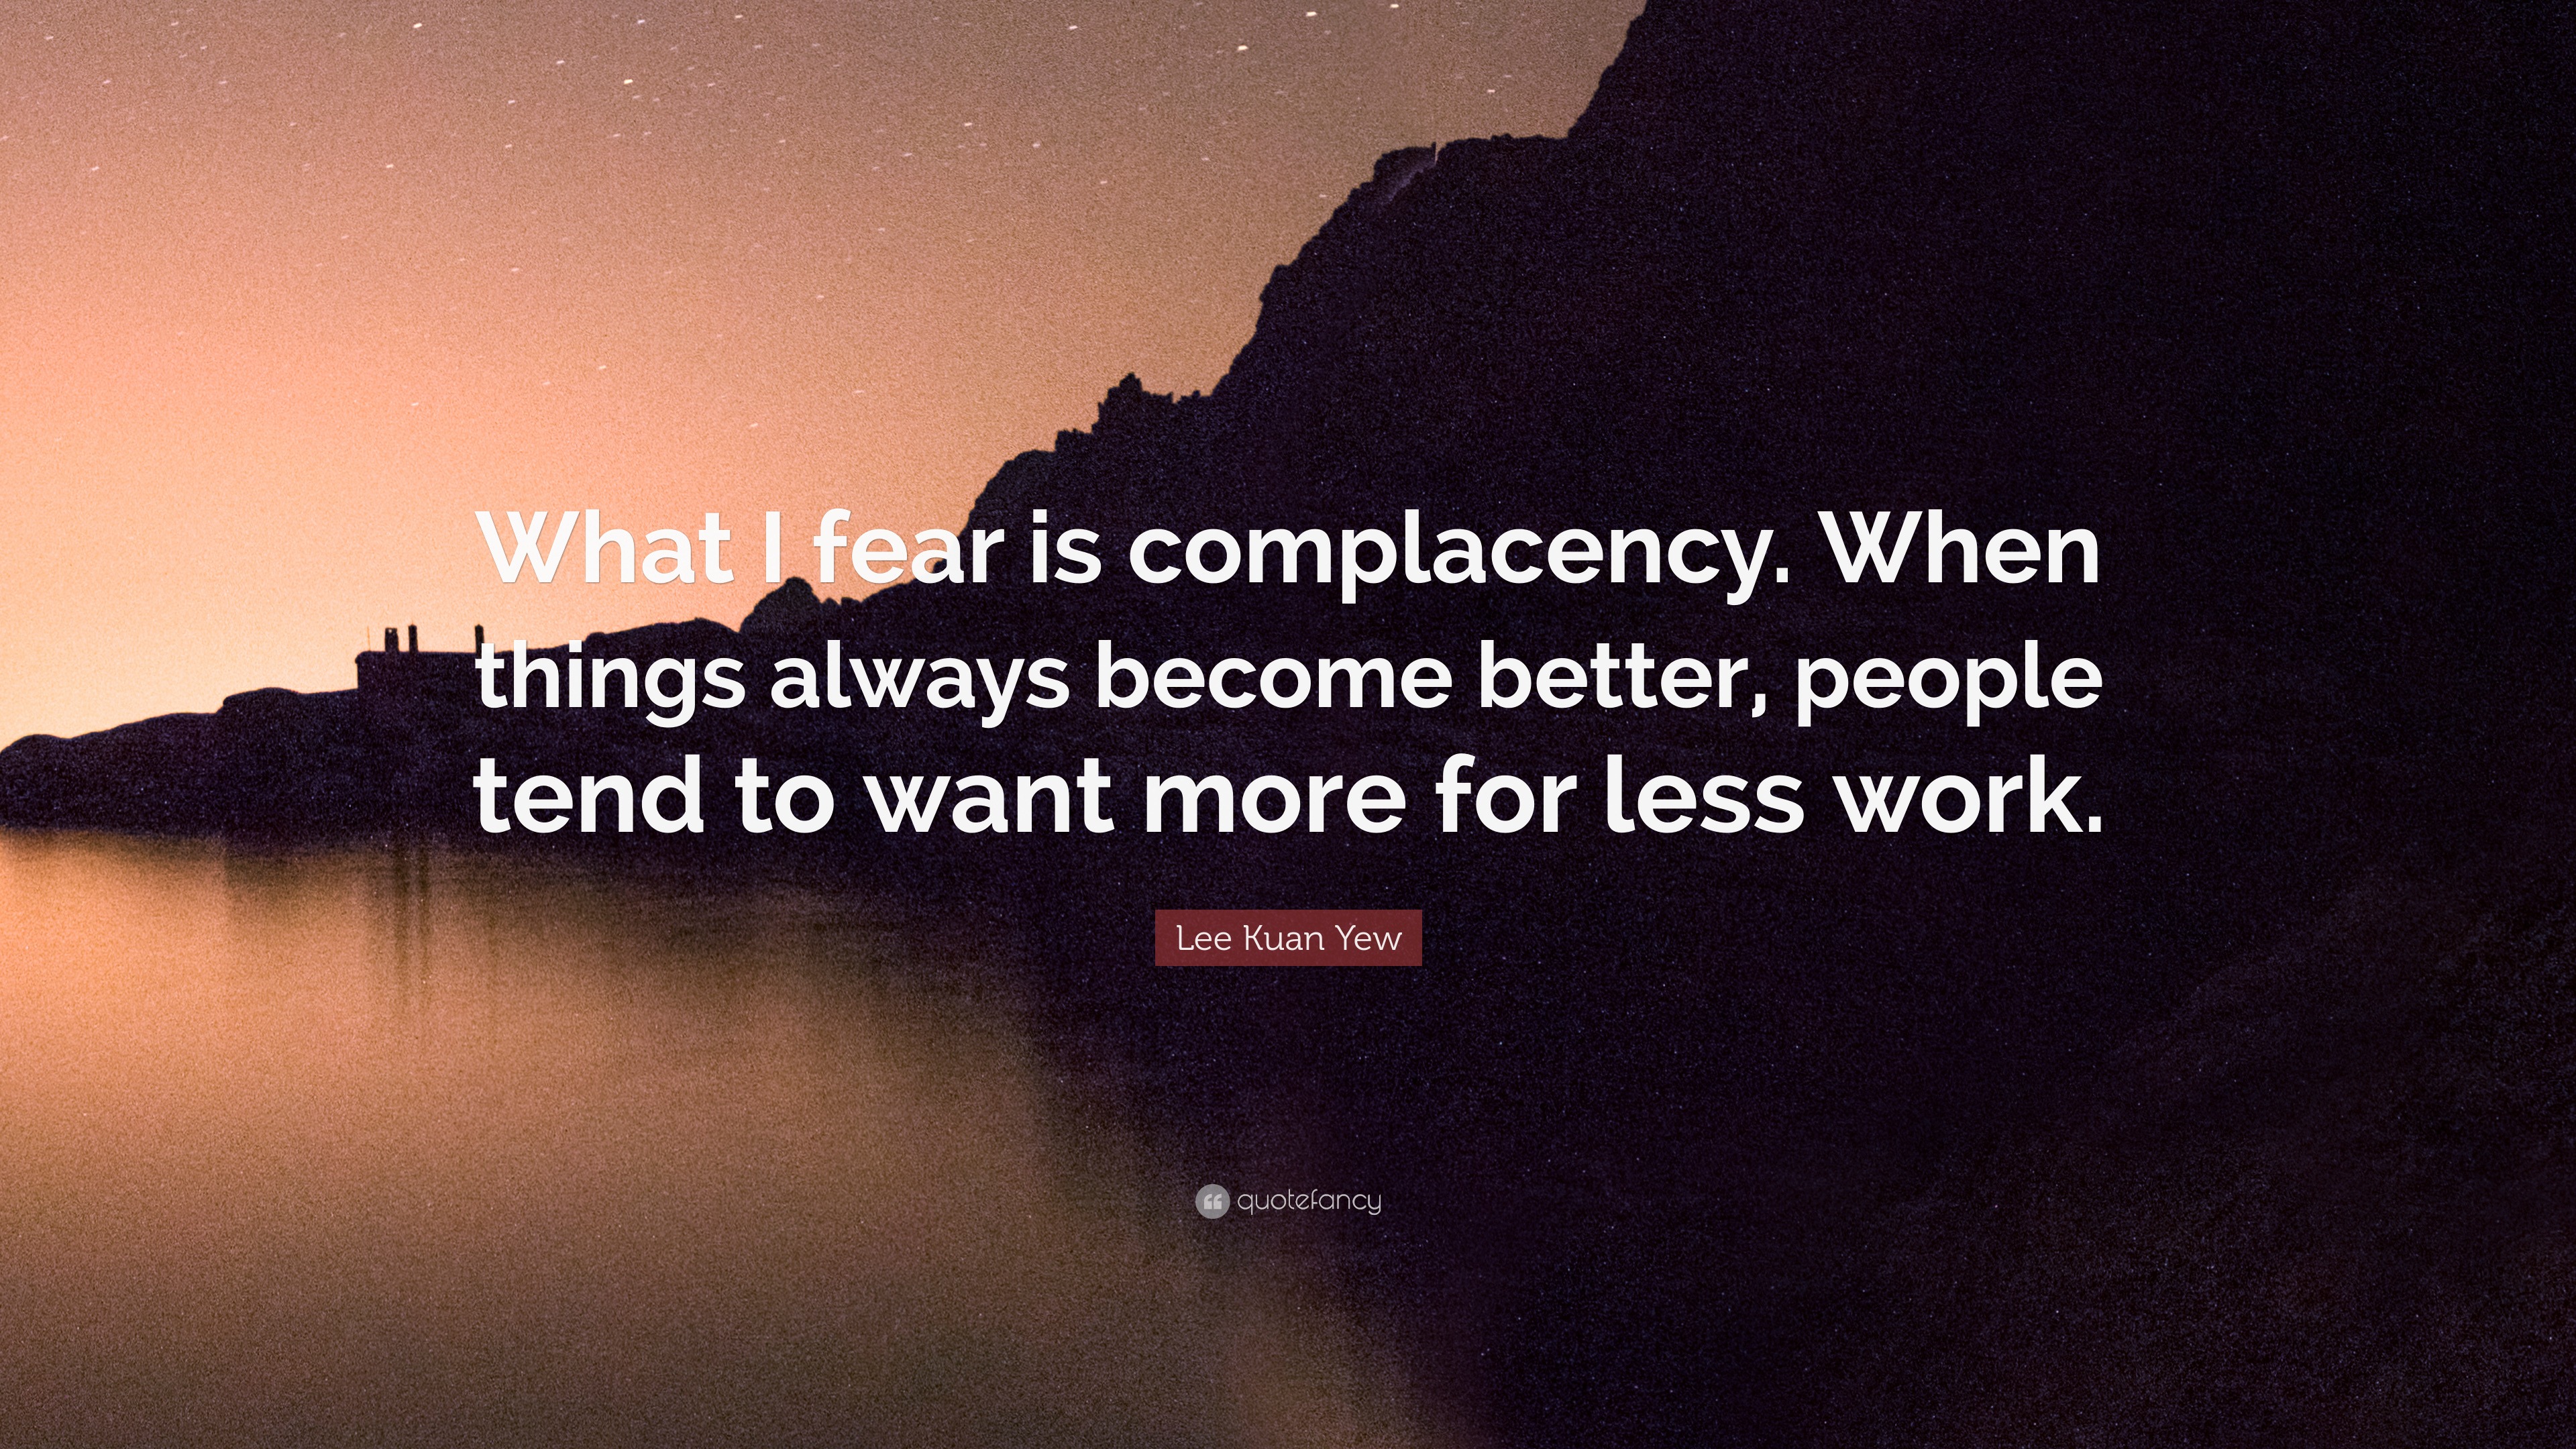 Lee Kuan Yew Quote “what I Fear Is Complacency When